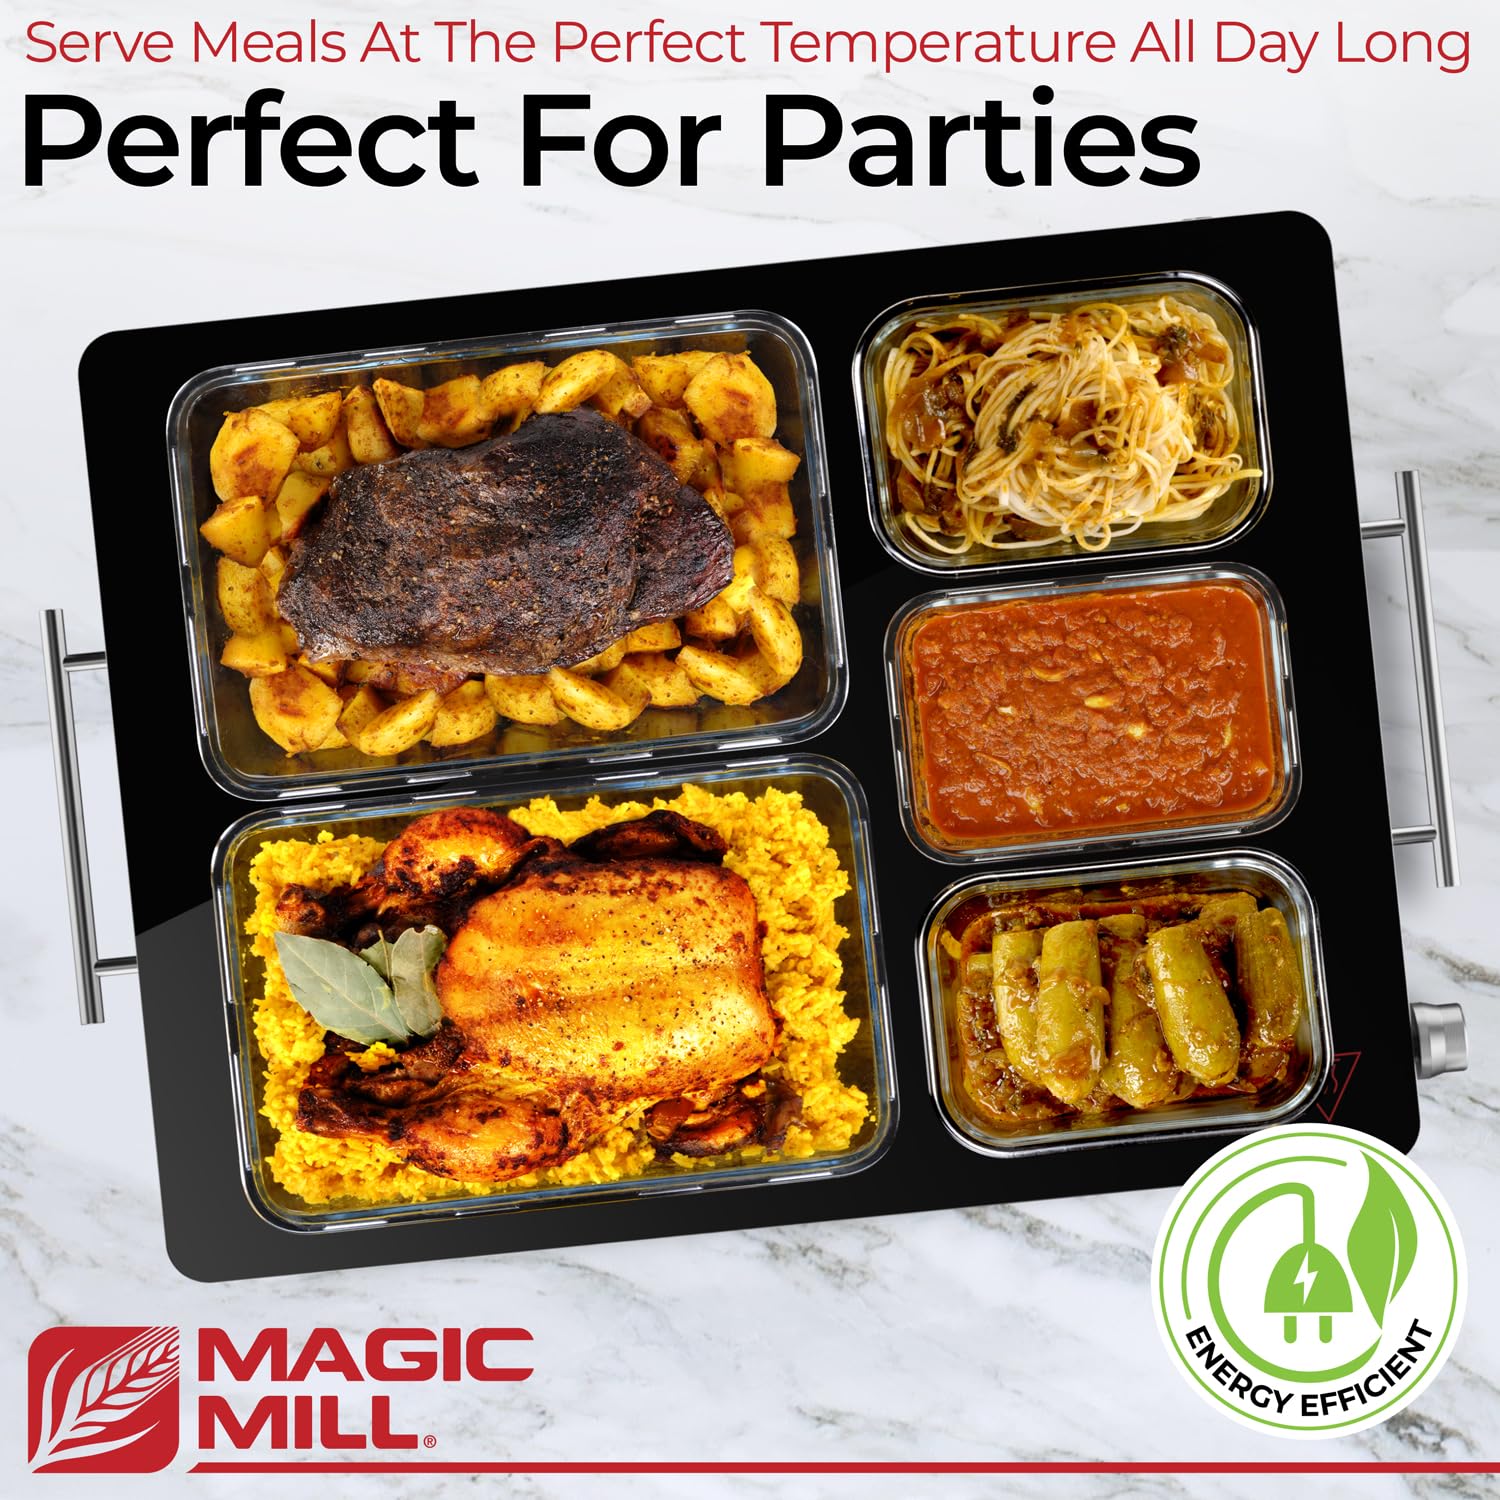 Magic Mill Extra Large Food Warmer for Parties | Electric Server Warming Tray, Hot Plate, with Adjustable Temperature Control, for Buffets, Restaurants, House Parties, Party Events (21" x 16")  - Very Good